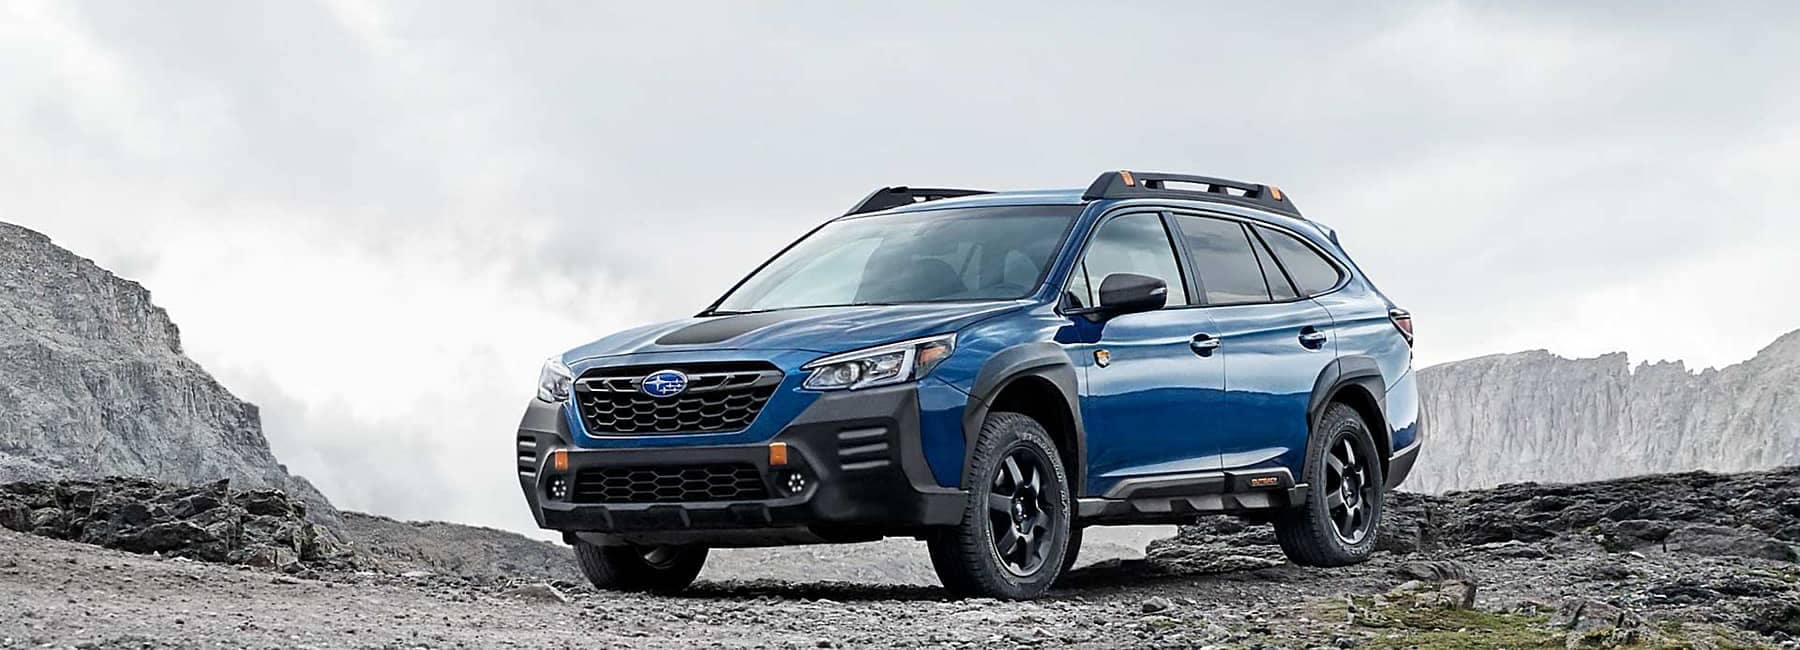 Outback- front 3qview-hero- parked in rocky surroundings-blue